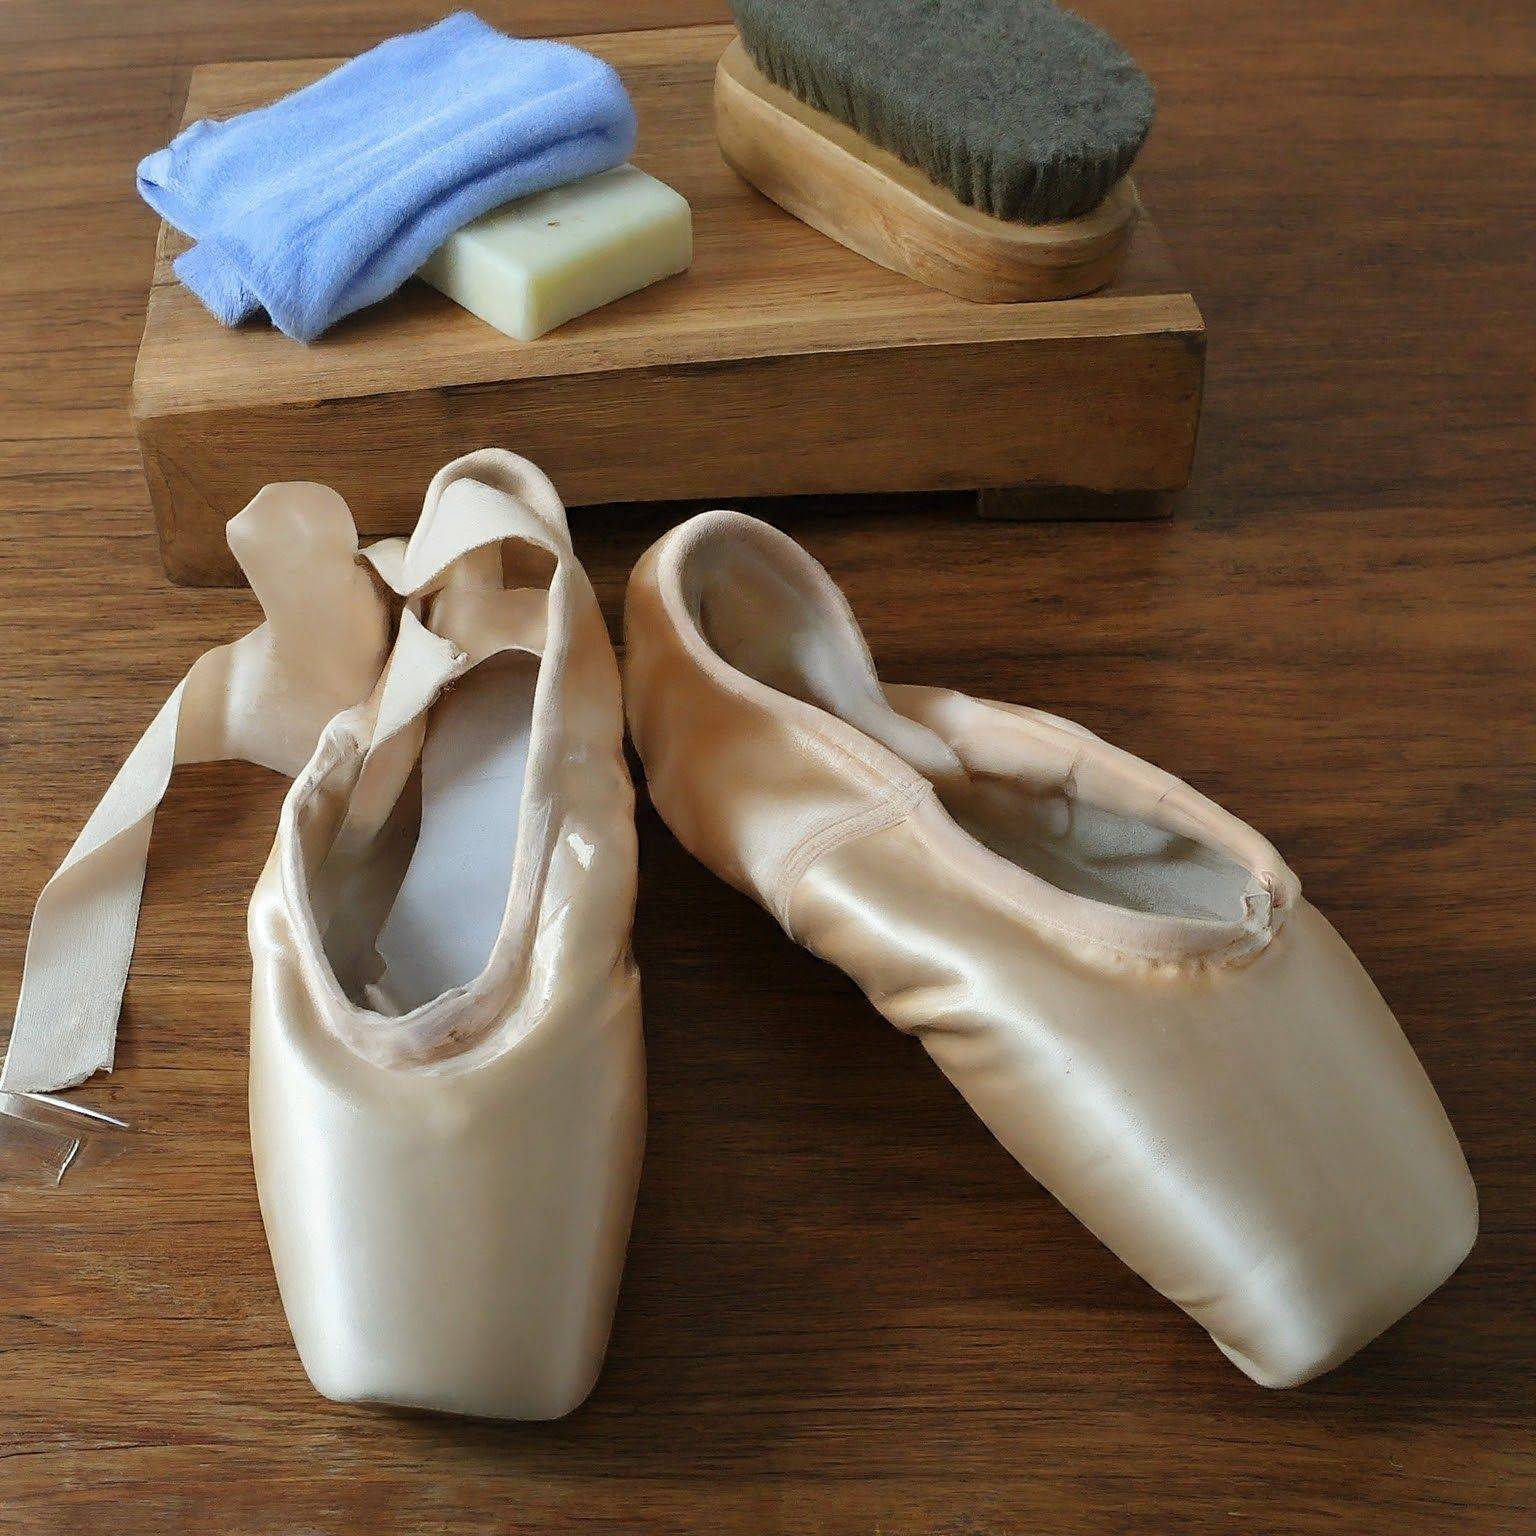 How to Clean Capezio Ballet Shoes: A Easy to Follow Step by Step Guide